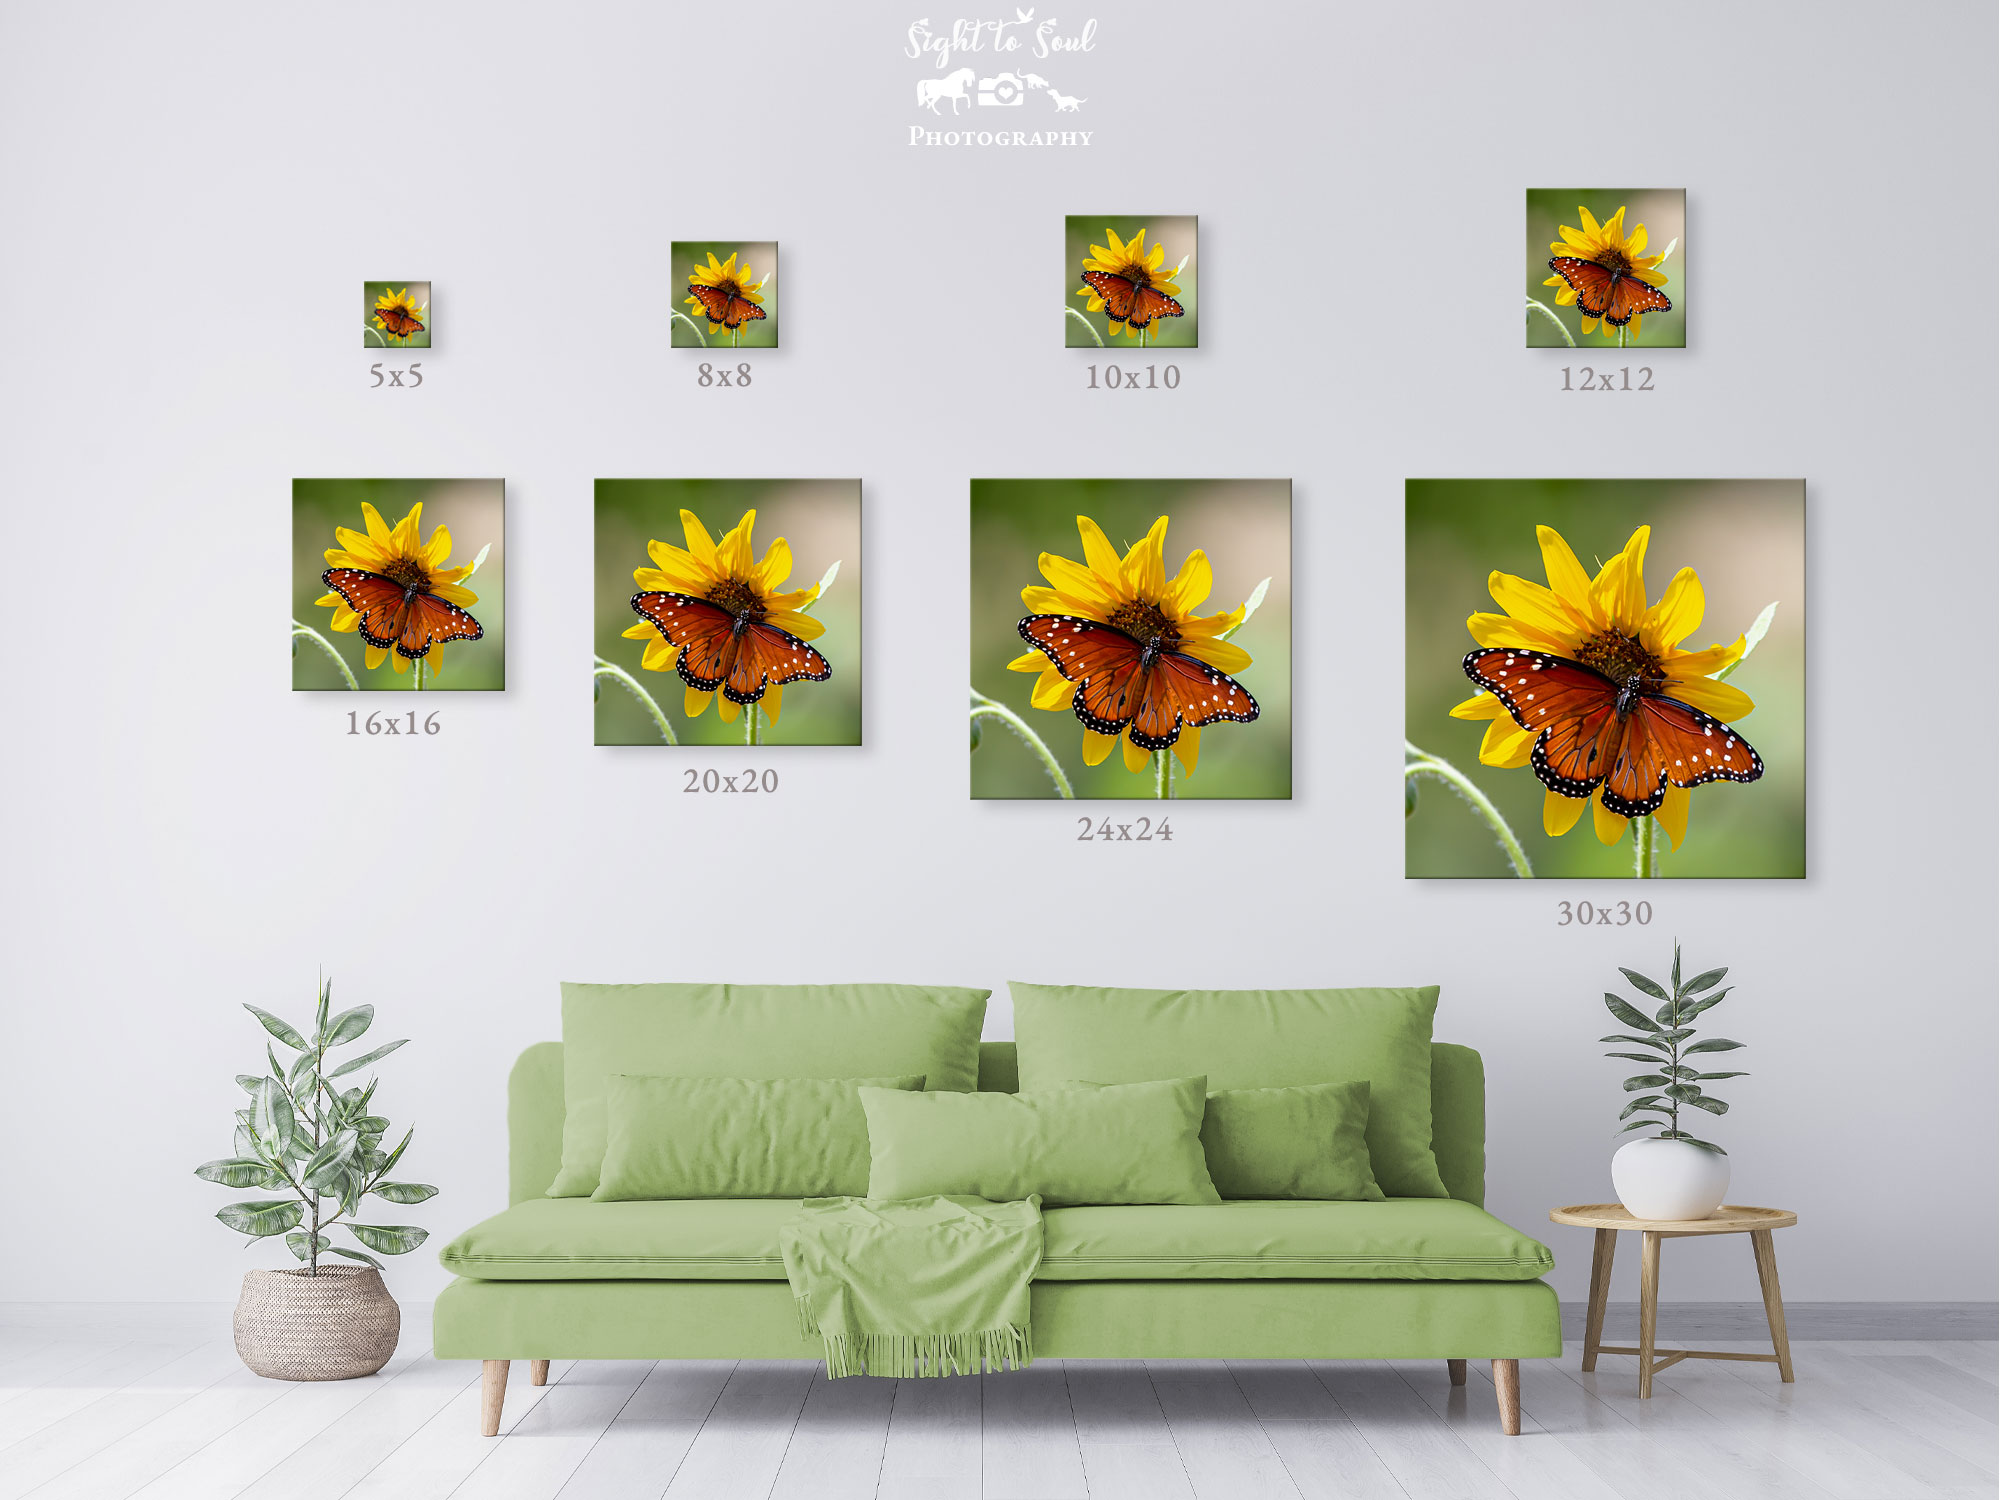 Queen Butterfly Wall Art, Nature Photography, Butterfly on Sunflower Photo